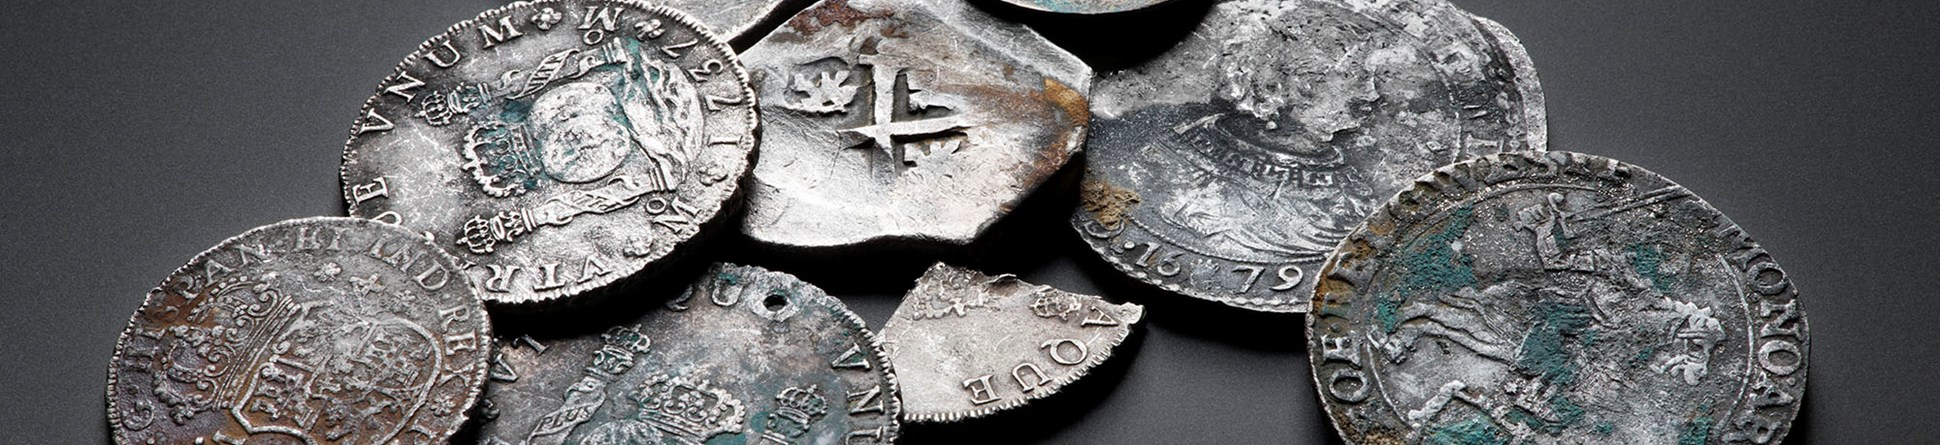 Collection of the different coins that were found in the wreck of the Rooswijk